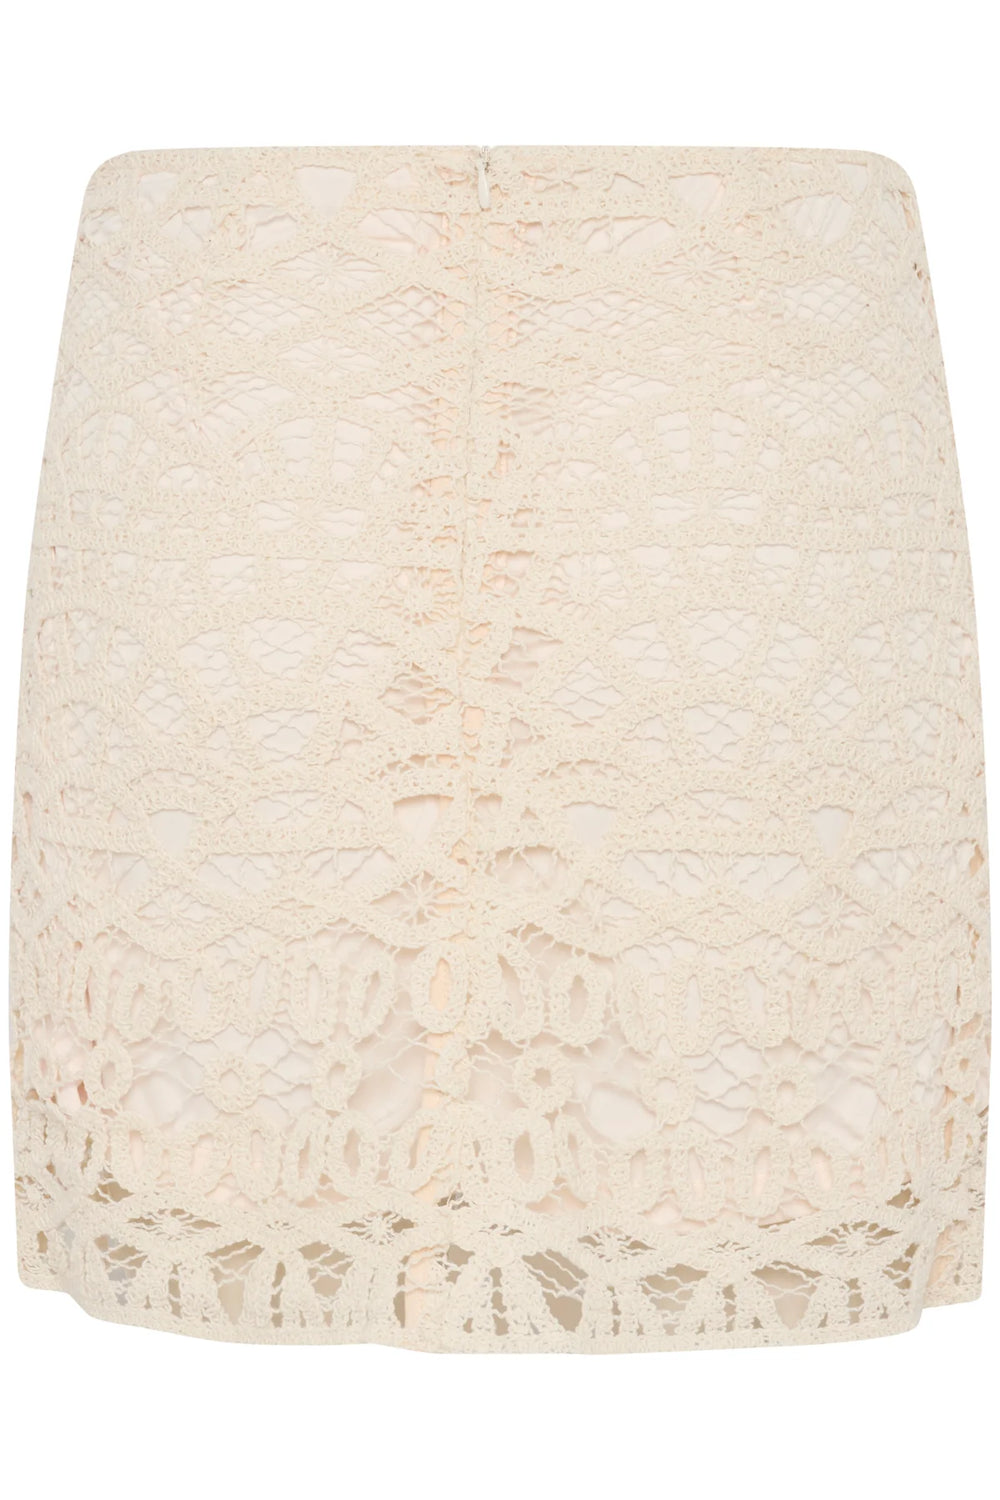 Nicholina Skirt by Soaked in Luxury